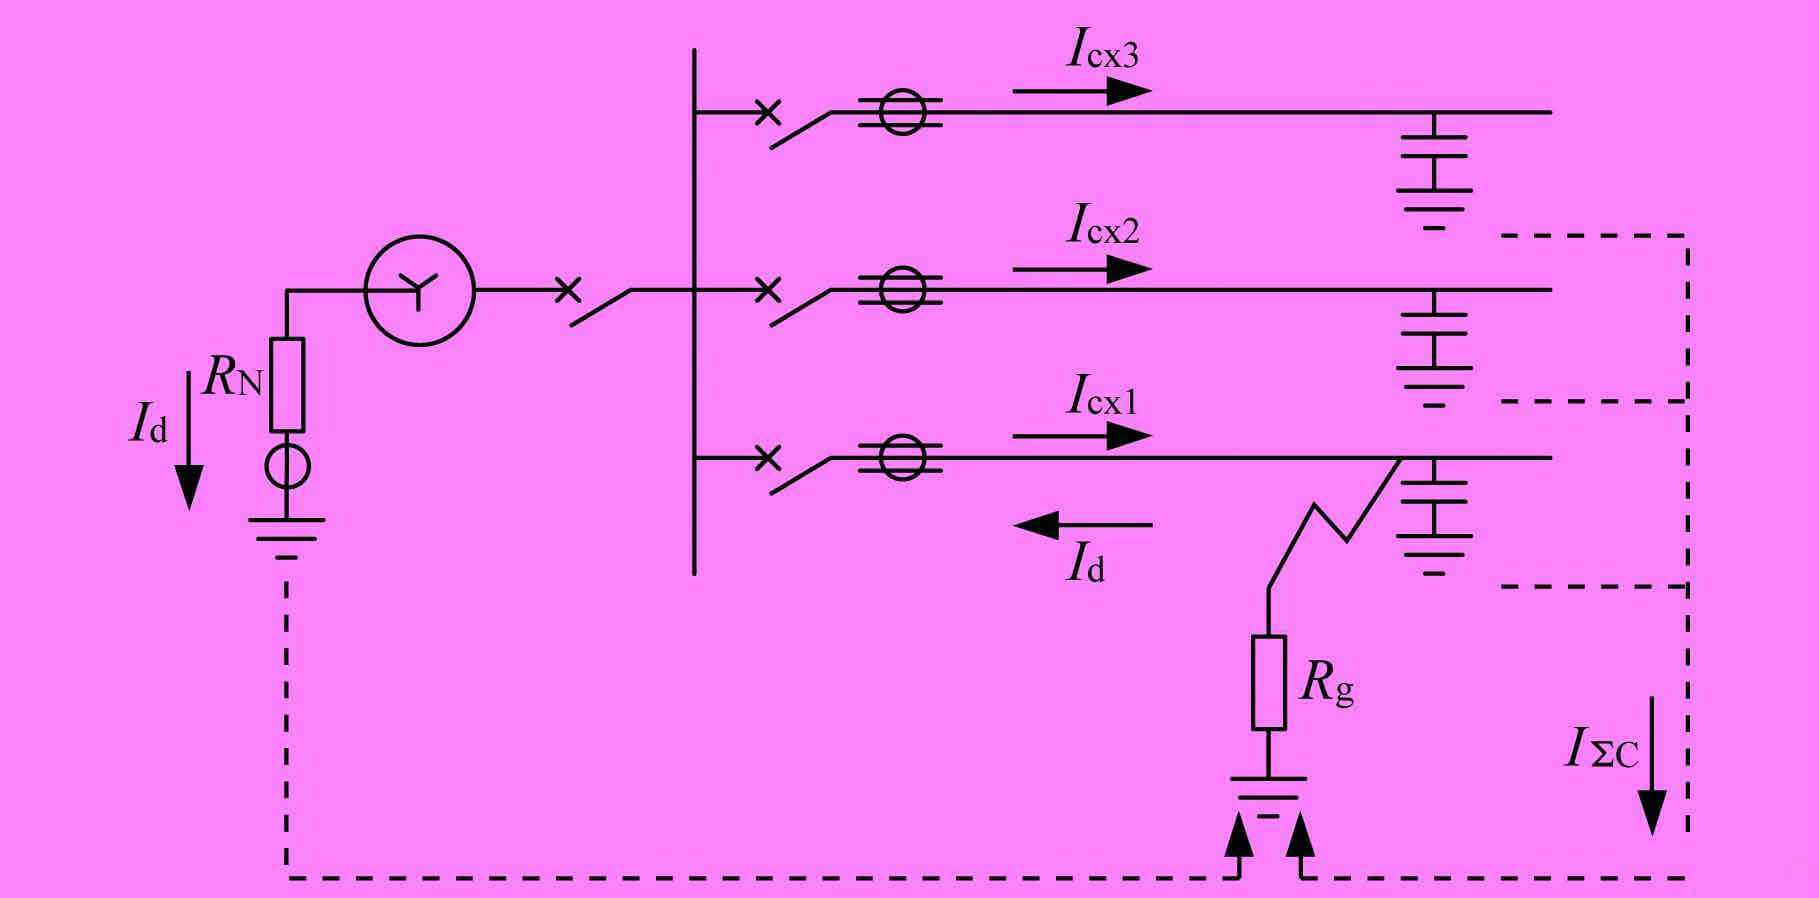 The schematic diagram of the short-circuit current of the cable with single-phase-to-ground fault